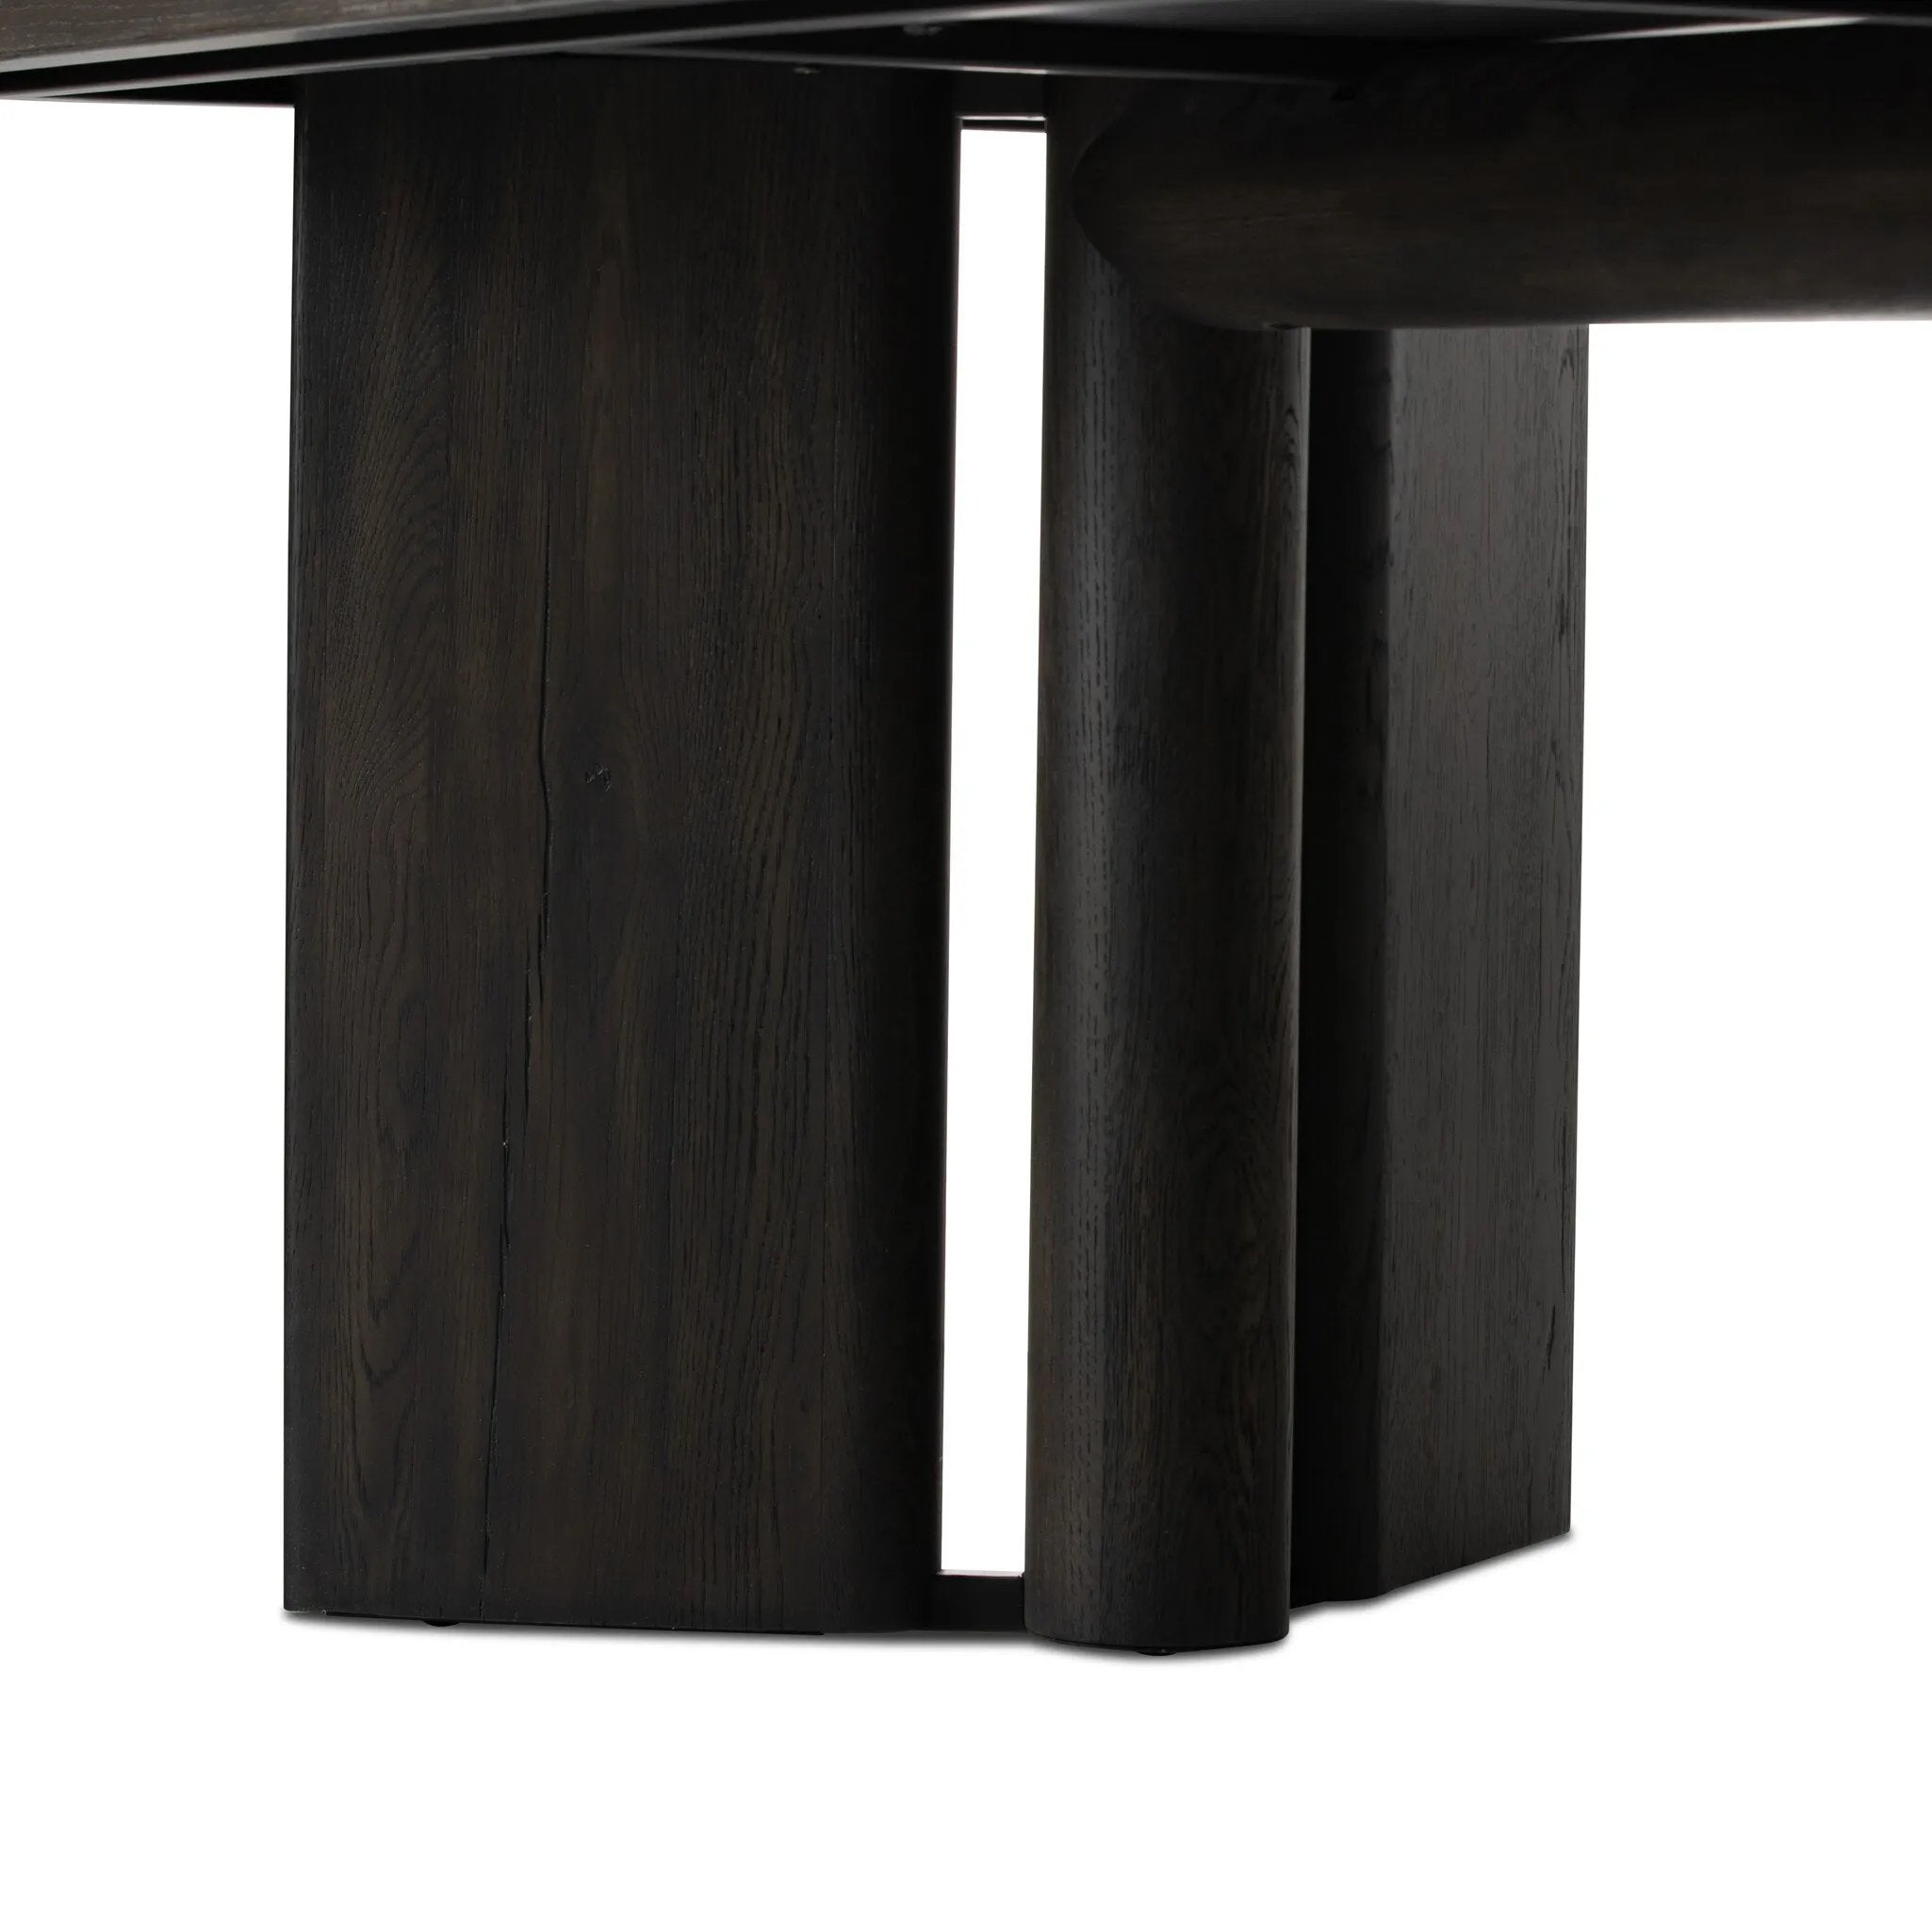 A smoked black finish brings character to this substantially sized dining table. Angled panel legs separated by a round cylinder craft a geometric look.Collection: Haide Amethyst Home provides interior design, new home construction design consulting, vintage area rugs, and lighting in the Nashville metro area.